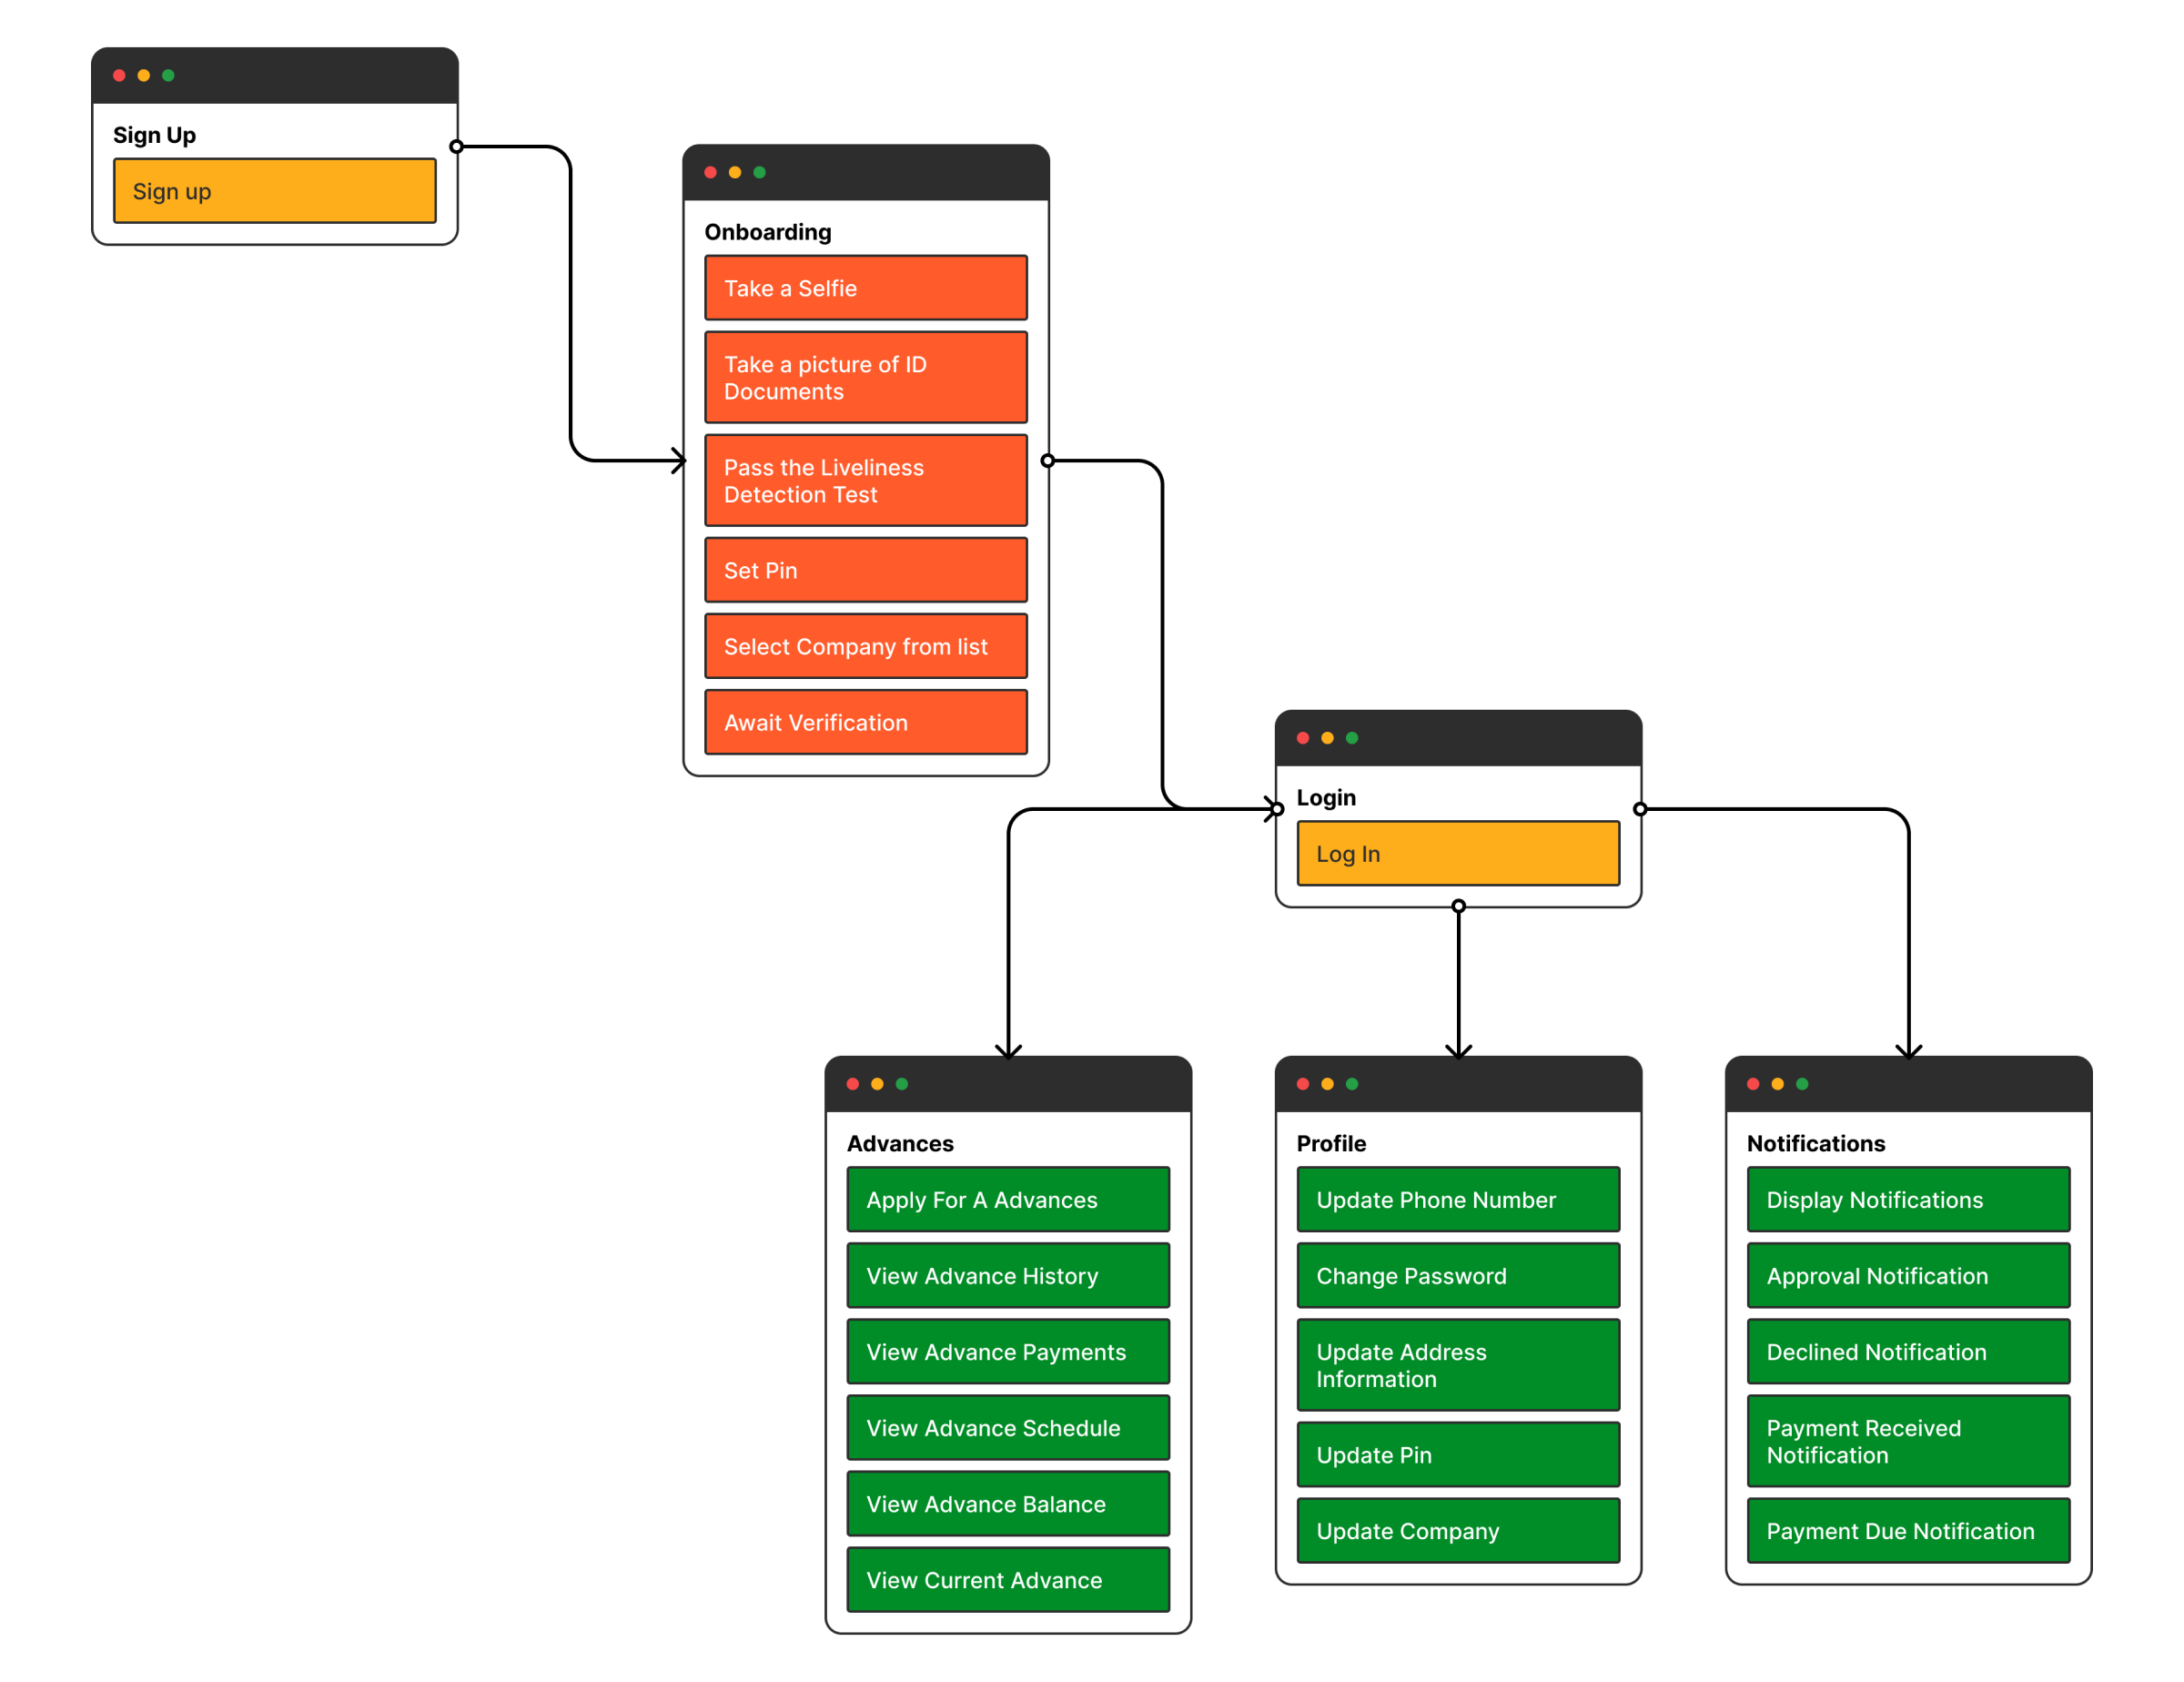 Information Architecture for Zafe's mobile app